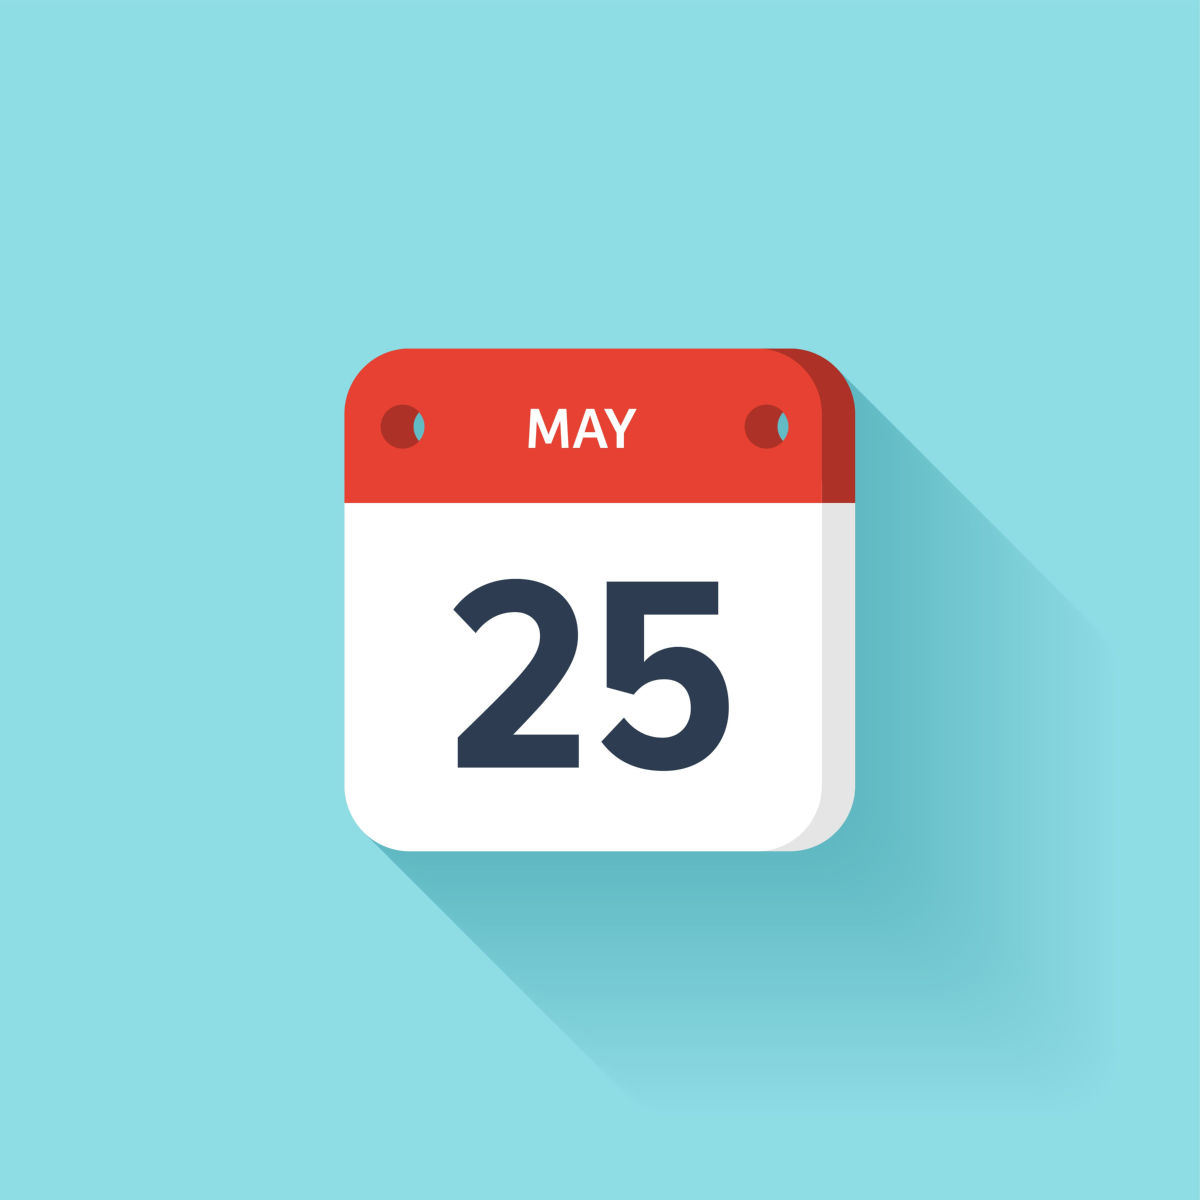 A calendar icon that says May 25, to mark the May 25 national days.